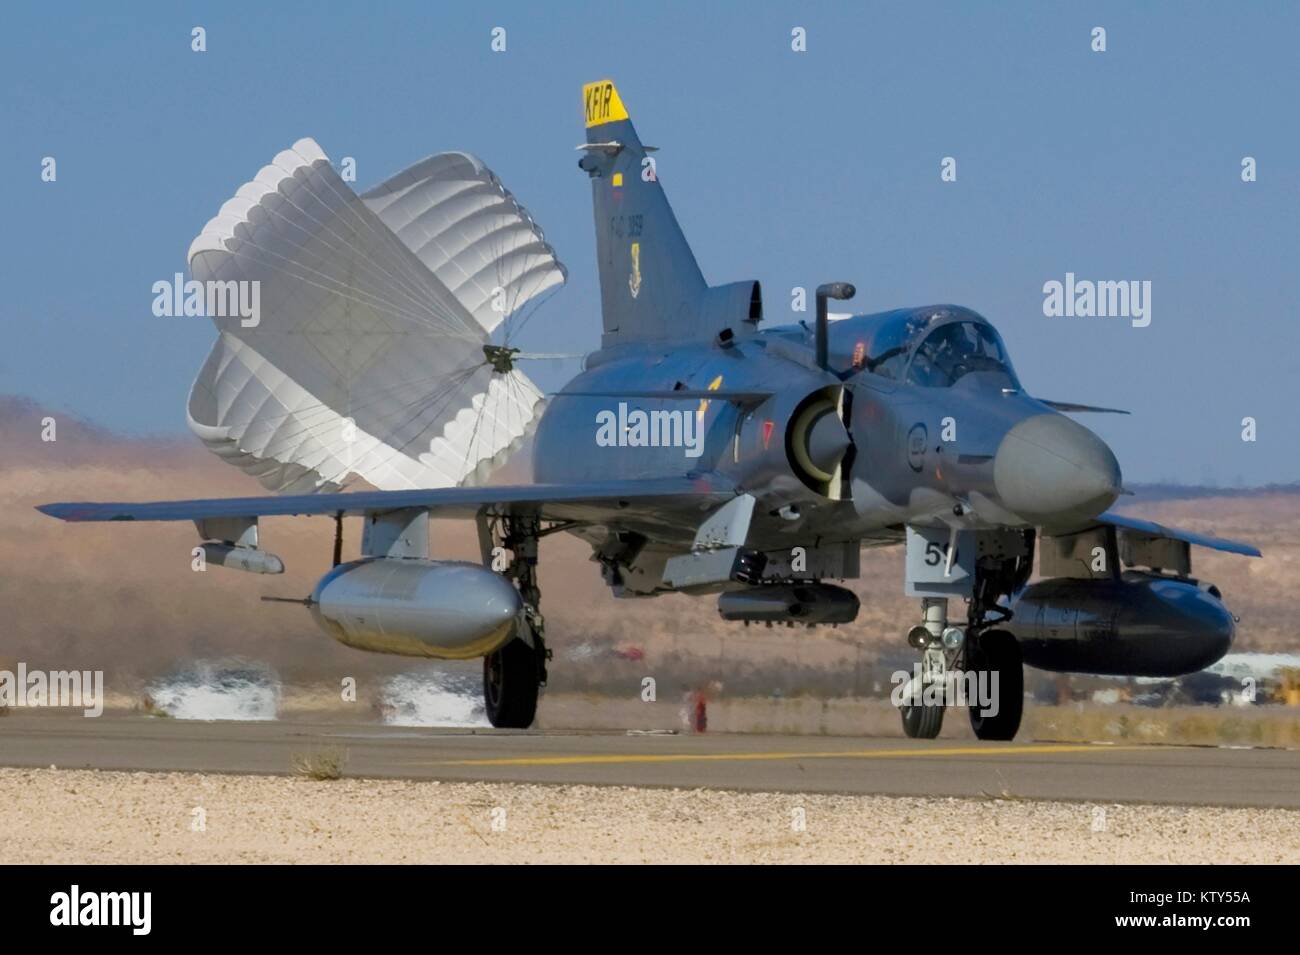 A drag chute deploys from a Colombian Air Force F-21 Kfir fighter jet aircraft as it lands at the Nellis Air Force Base during exercise Red Flag July 18, 2012 in Las Vegas, Nevada. Stock Photo